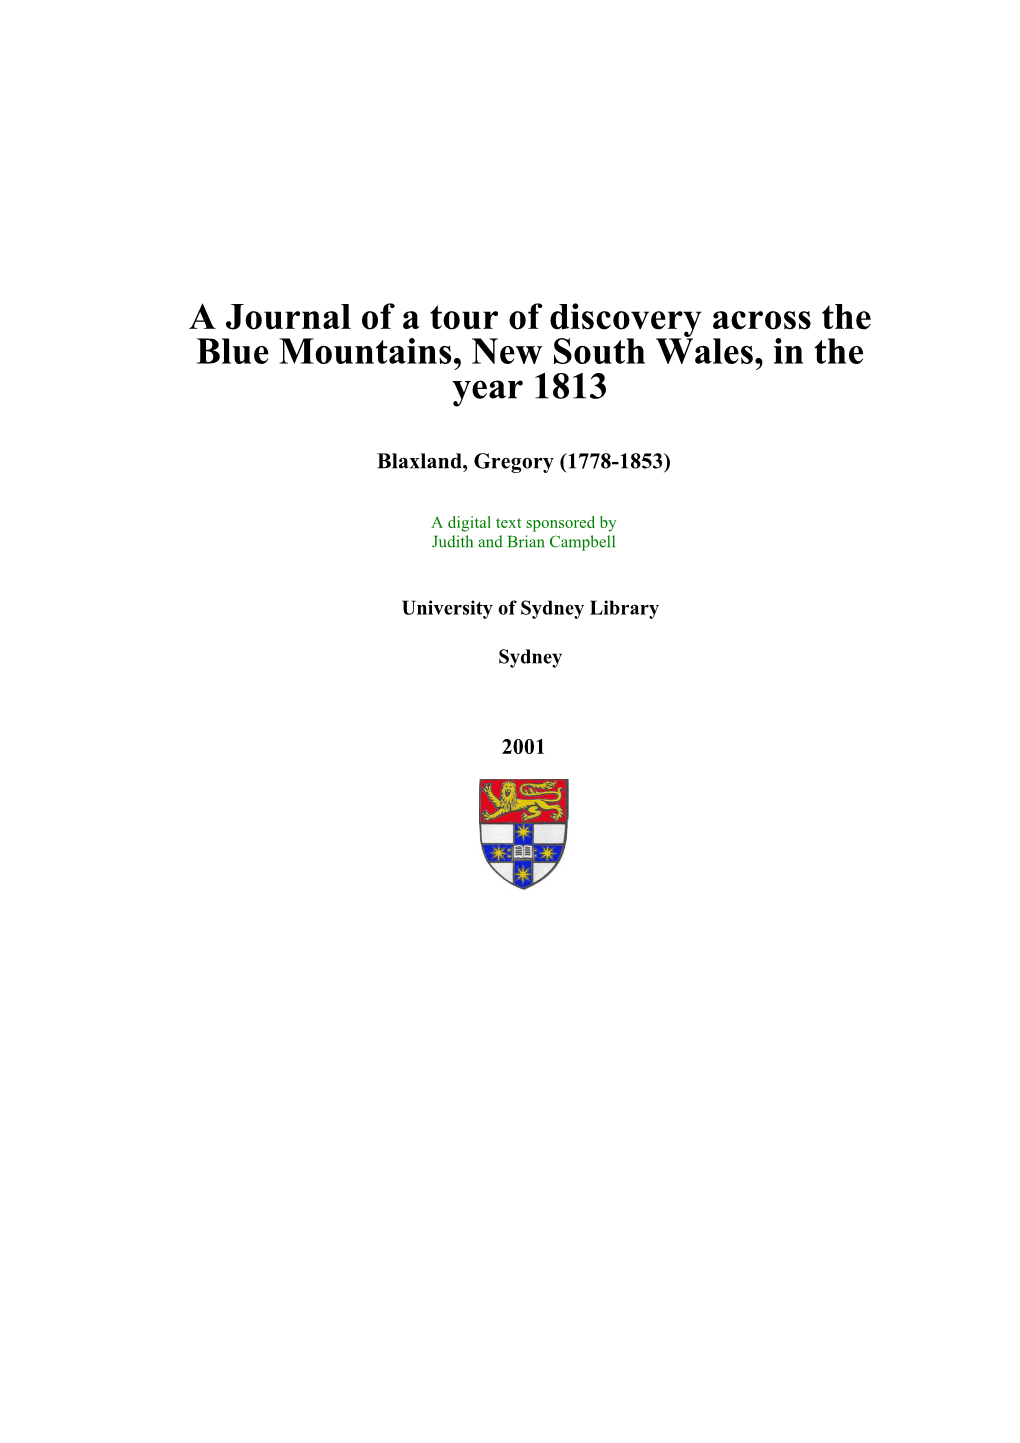 A Journal of a Tour of Discovery Across the Blue Mountains, New South Wales, in the Year 1813